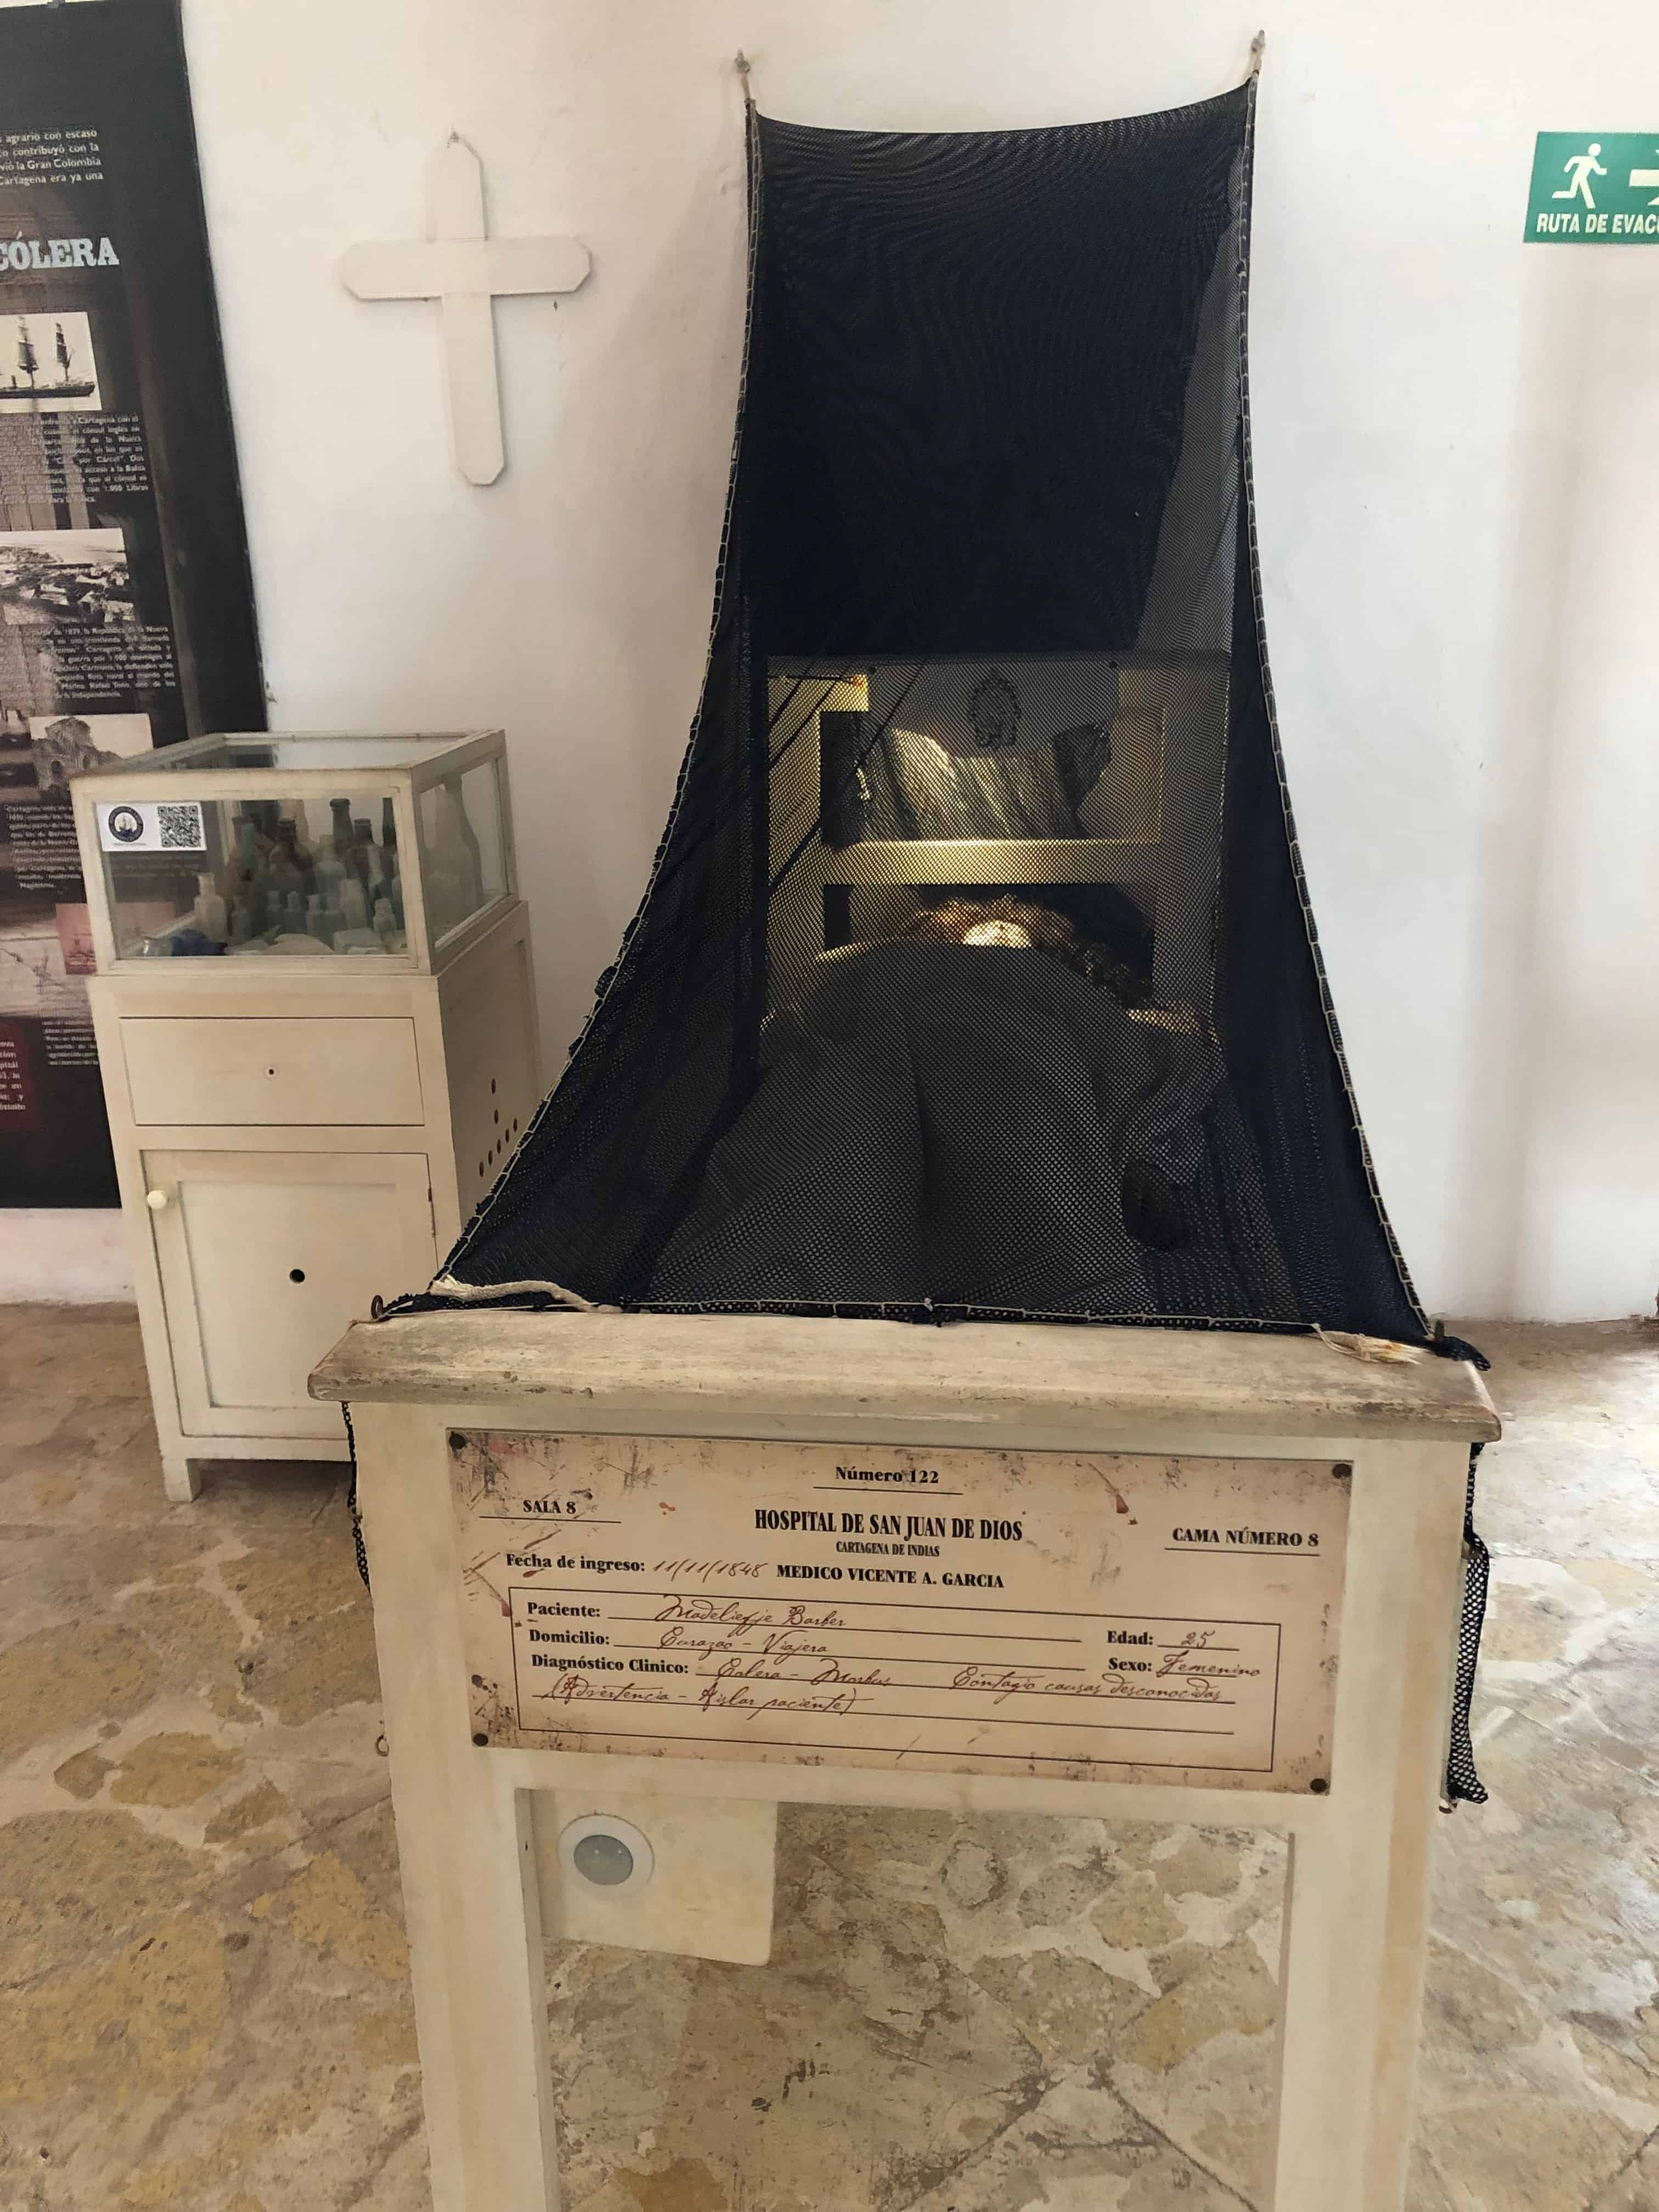 Hospital display at the Caribbean Naval Museum in Cartagena, Colombia